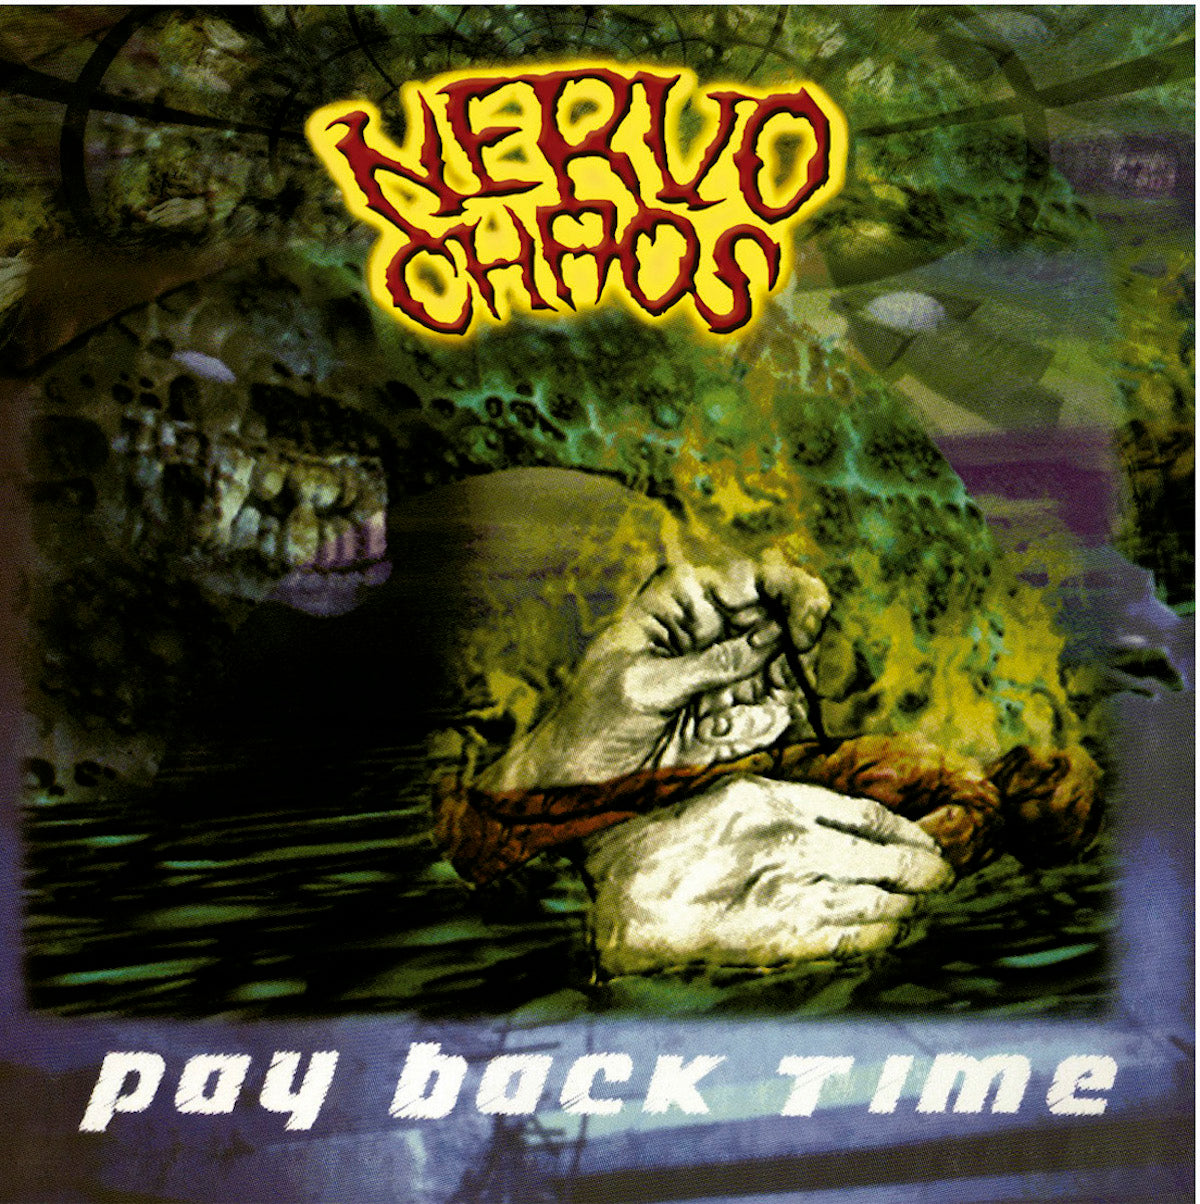 CD "Pay Back Time" (1998)